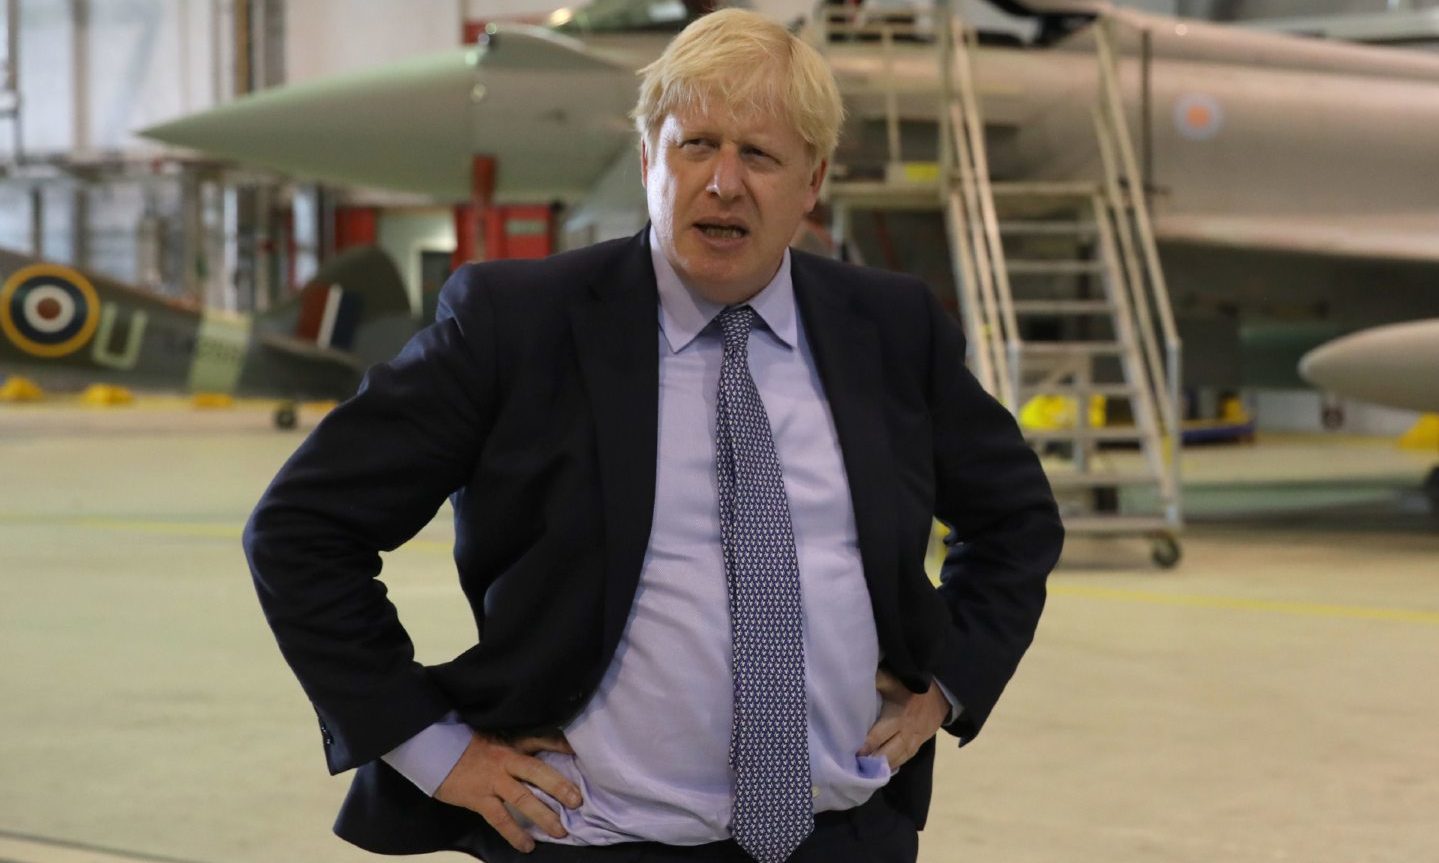 Flying visit: Prime Minister Boris Johnson is on holiday in Scotland.